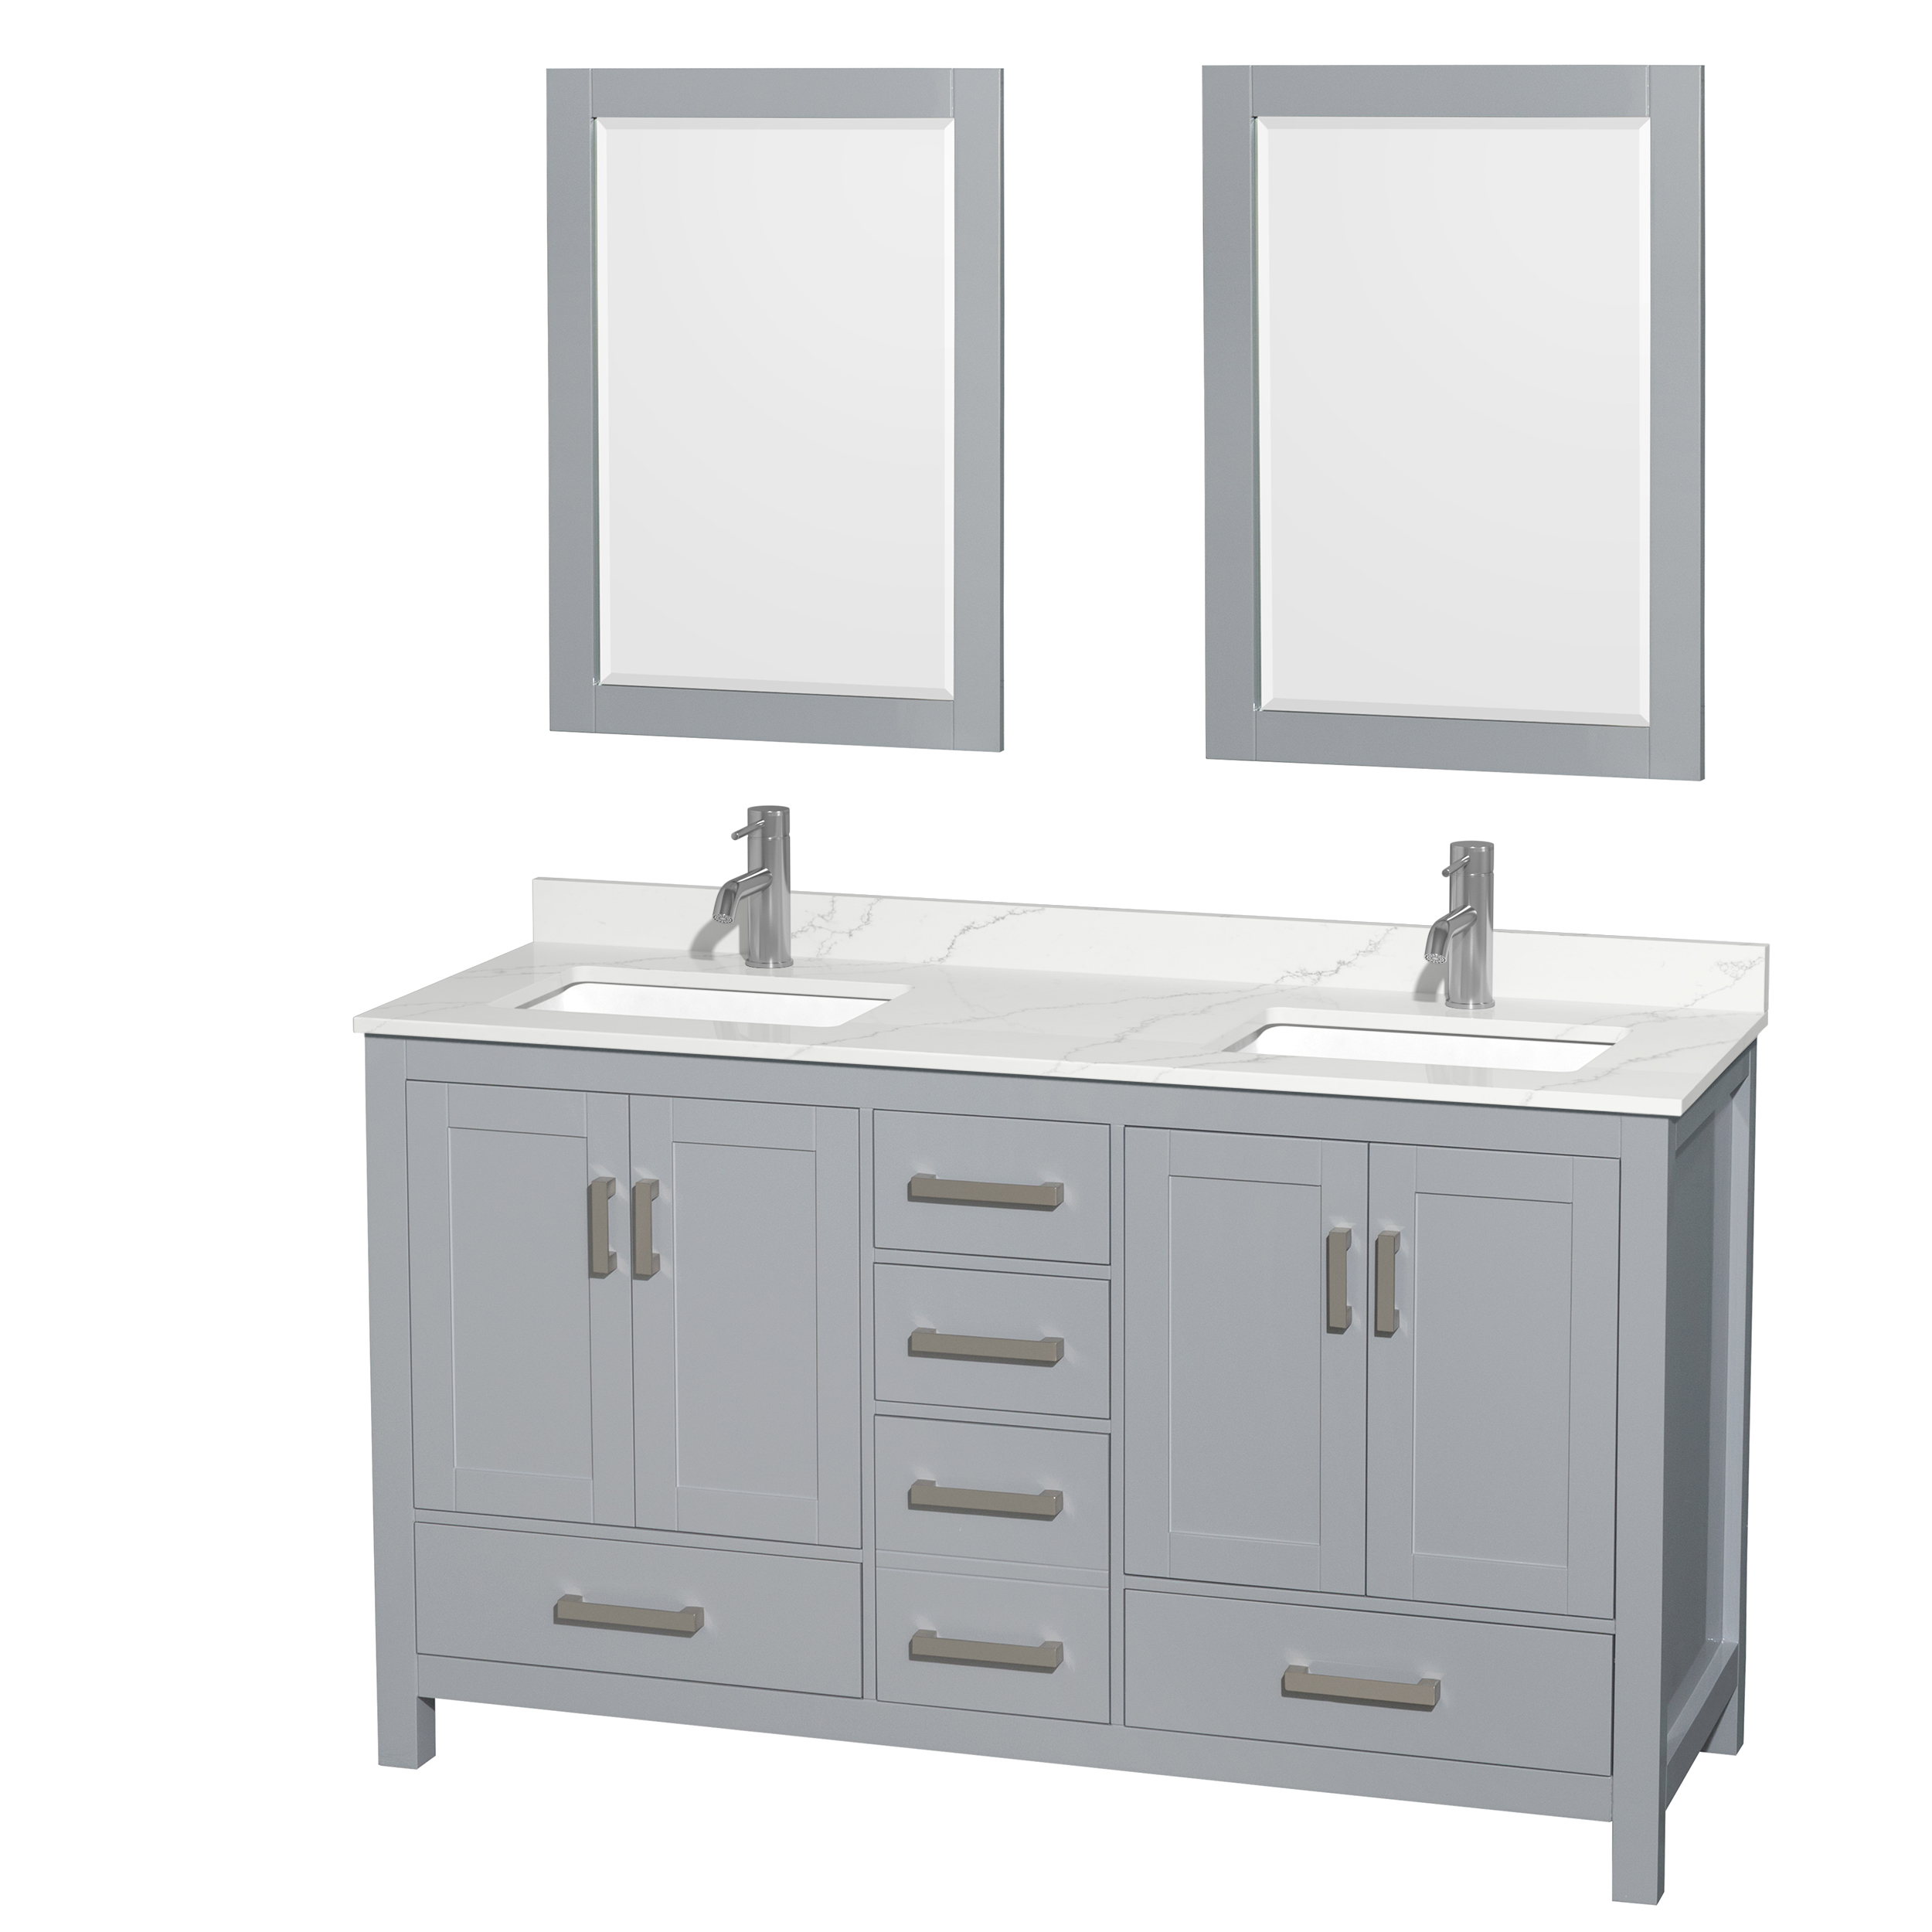 Sheffield 60" Double Bathroom Vanity by Wyndham Collection - Gray WC-1414-60-DBL-VAN-GRY-